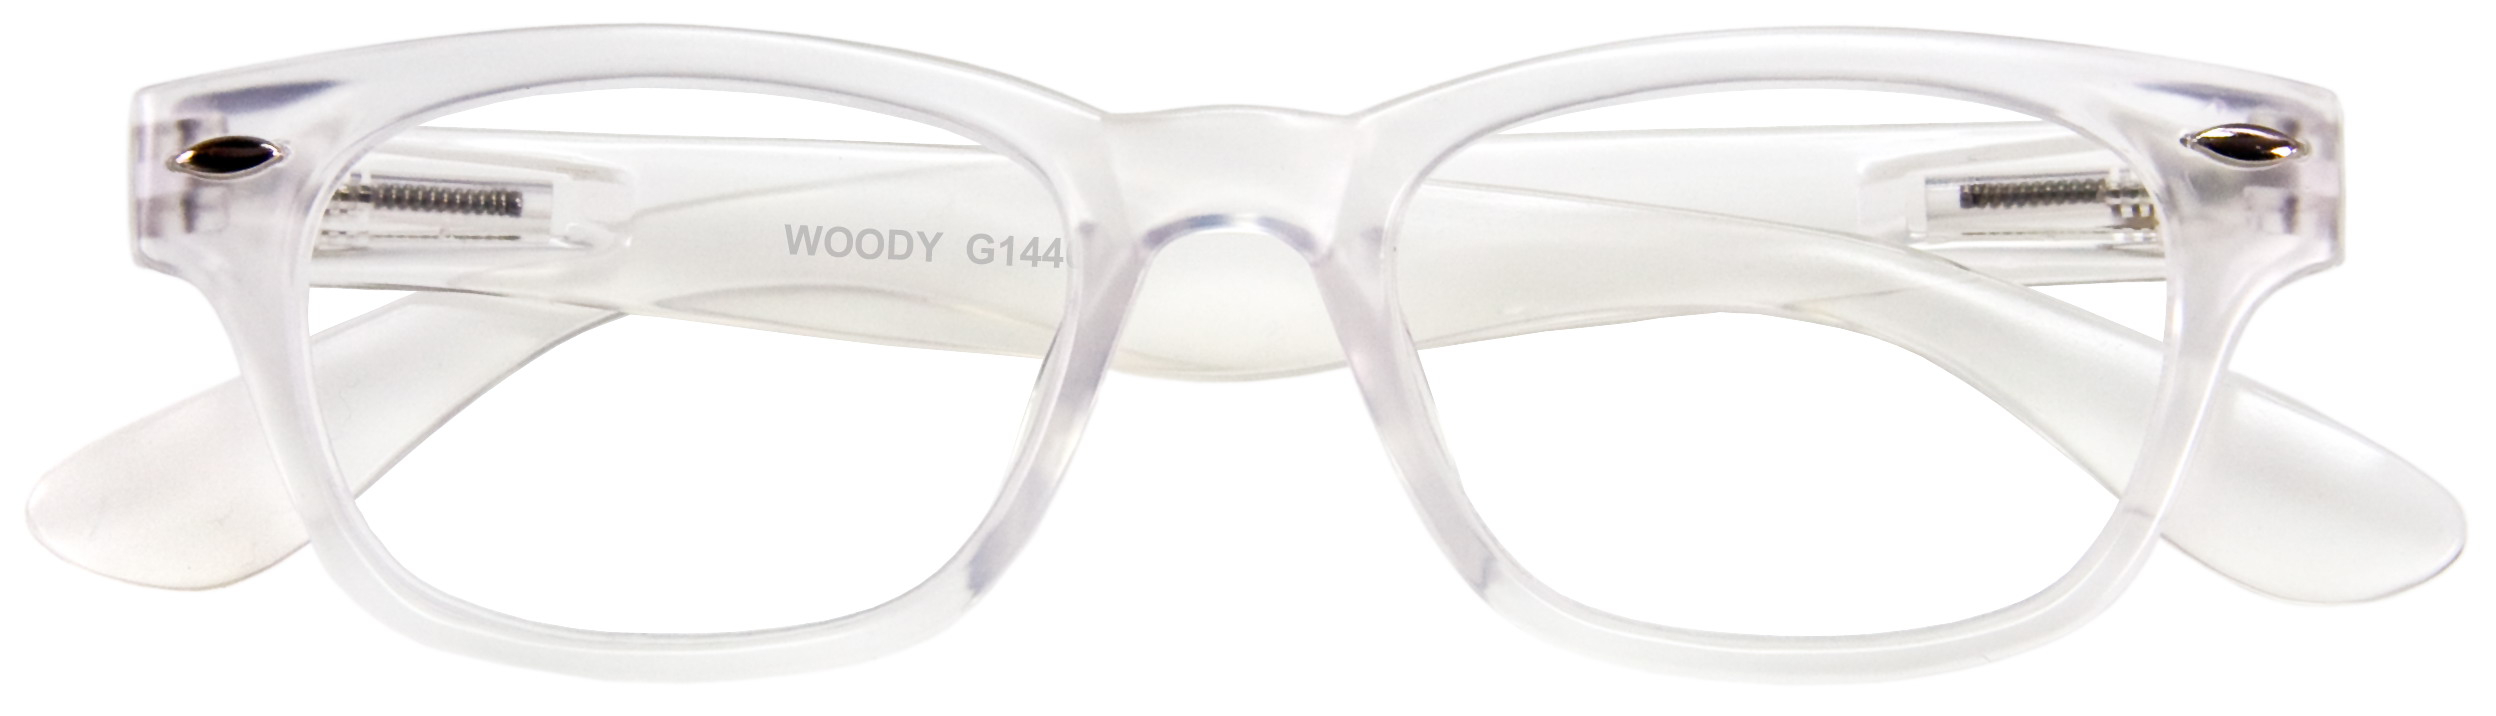 Woody Crystal Readers by I Need You Readers